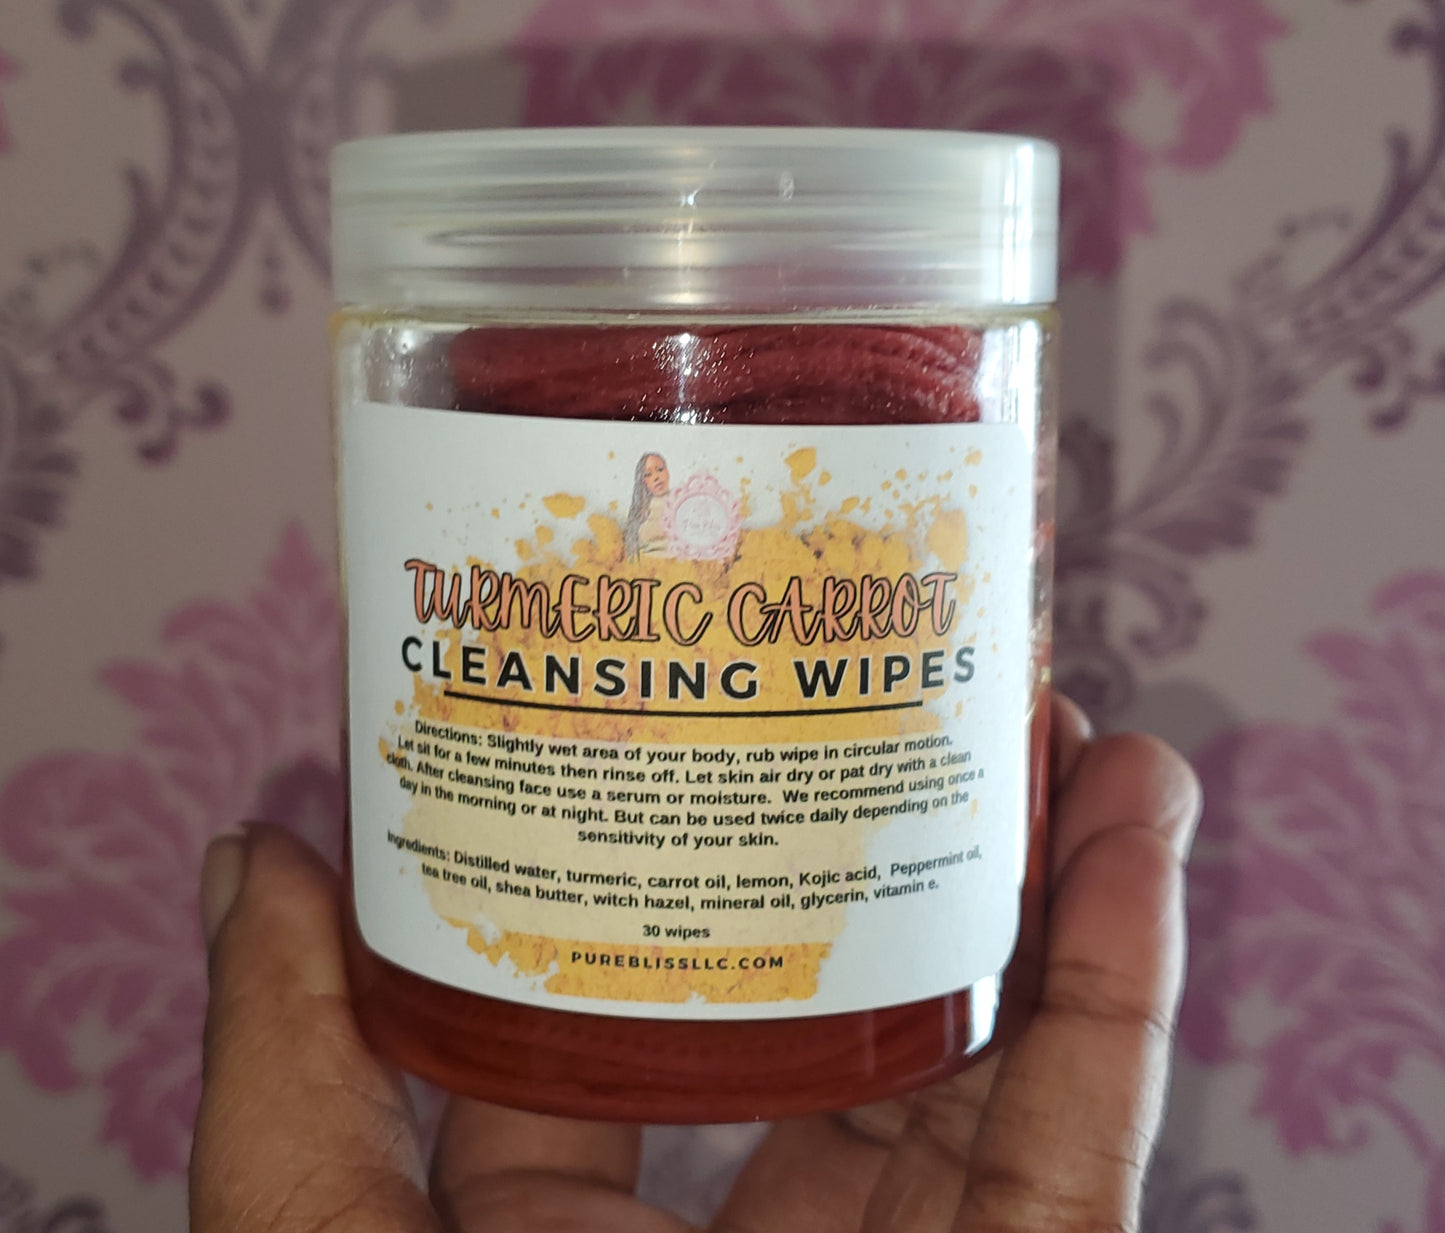 Turmeric Carrot cleansing wipes